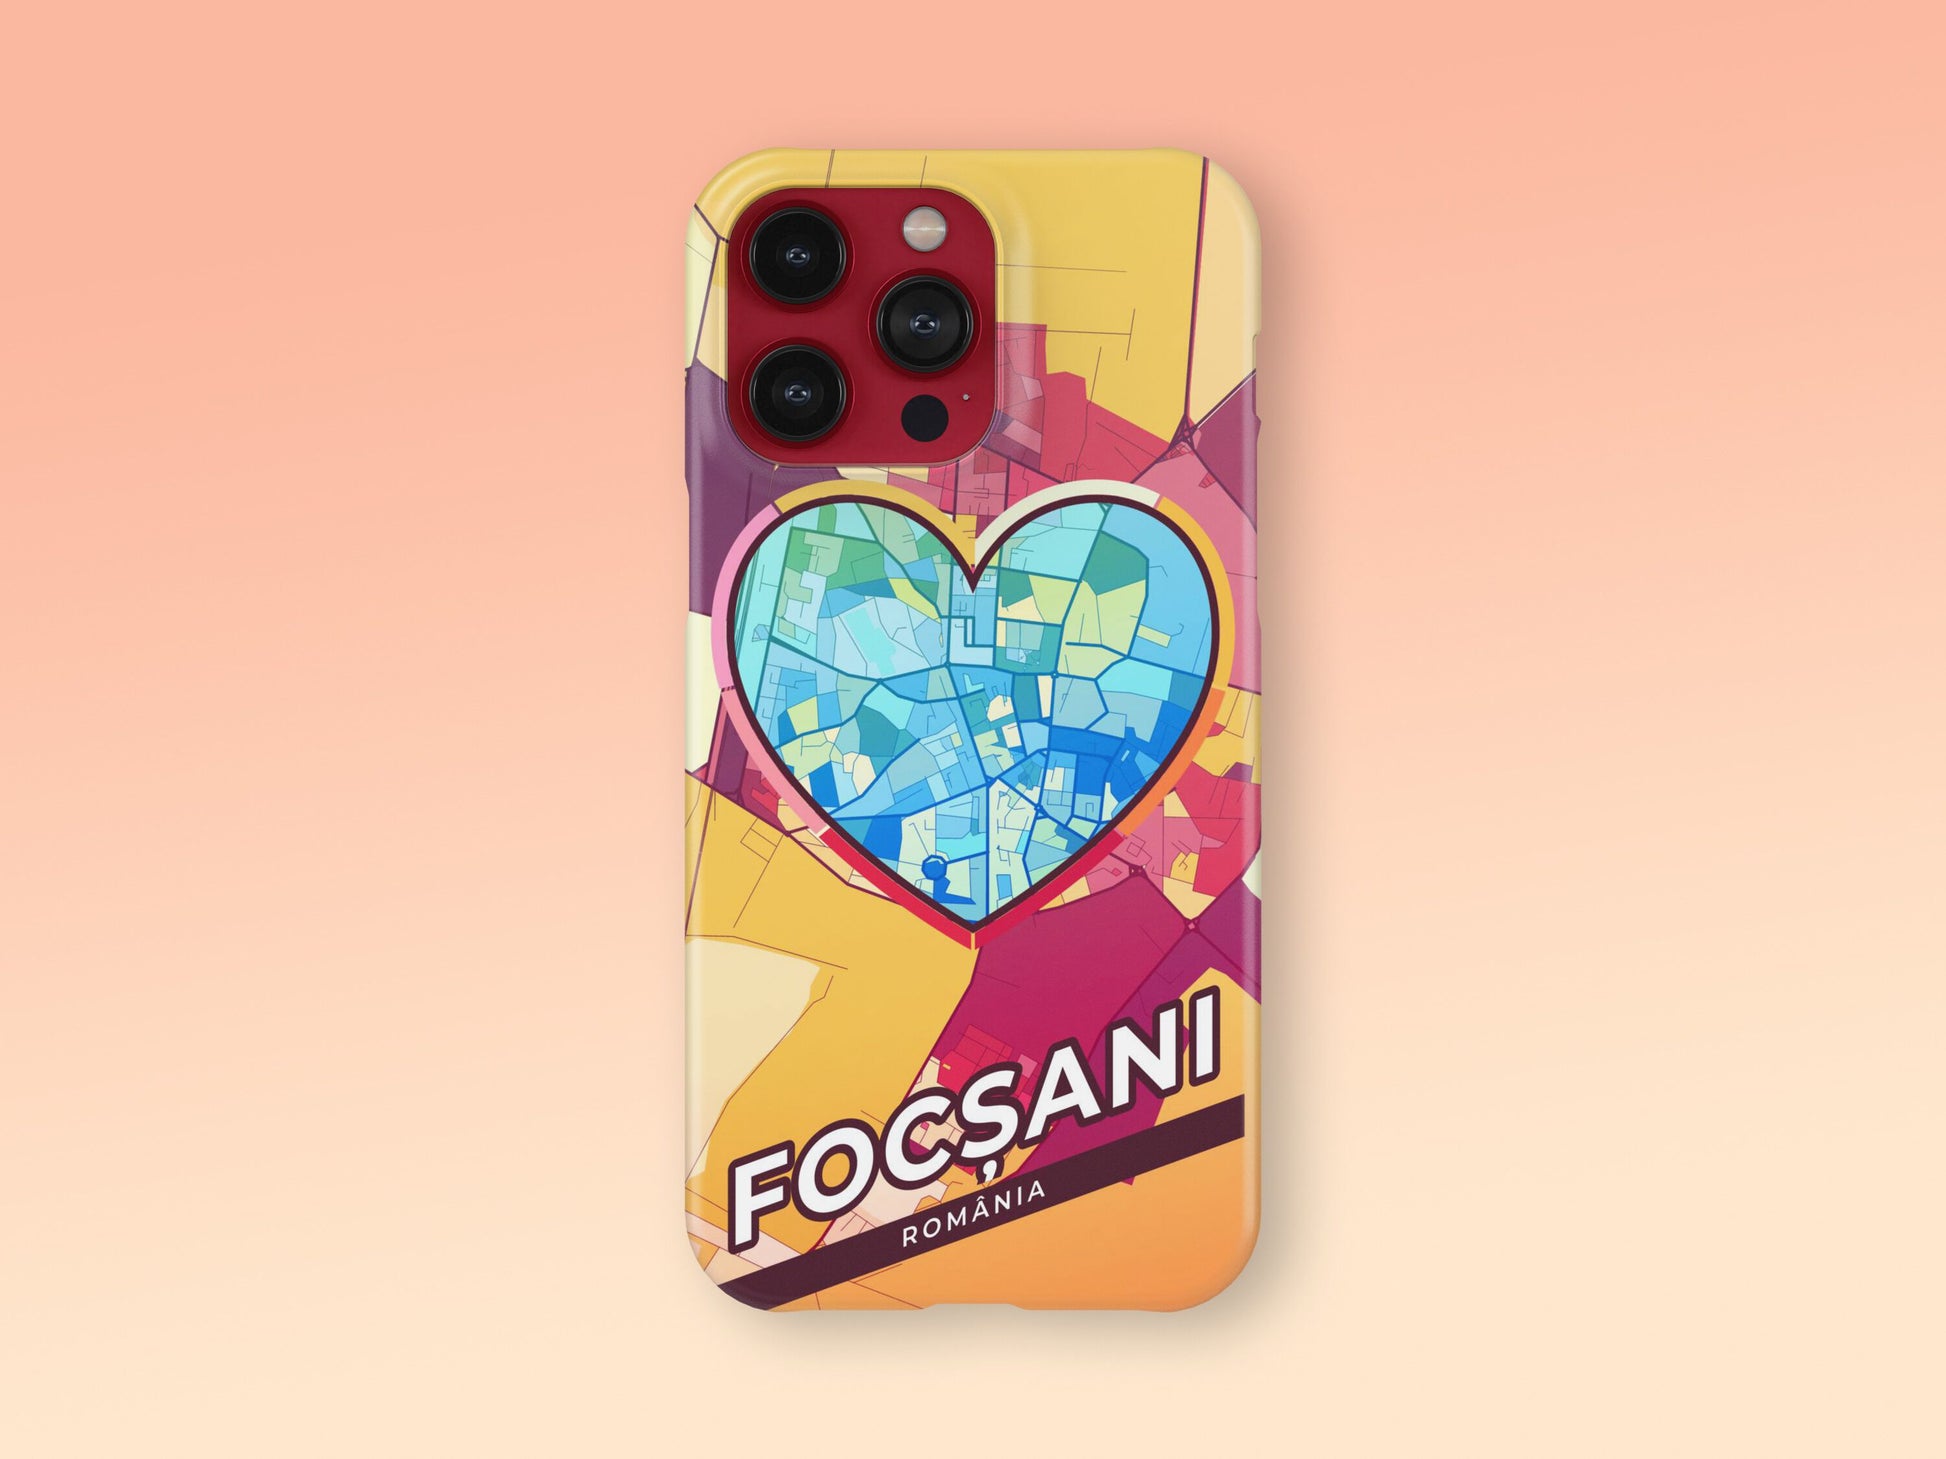 Focșani Romania slim phone case with colorful icon. Birthday, wedding or housewarming gift. Couple match cases. 2